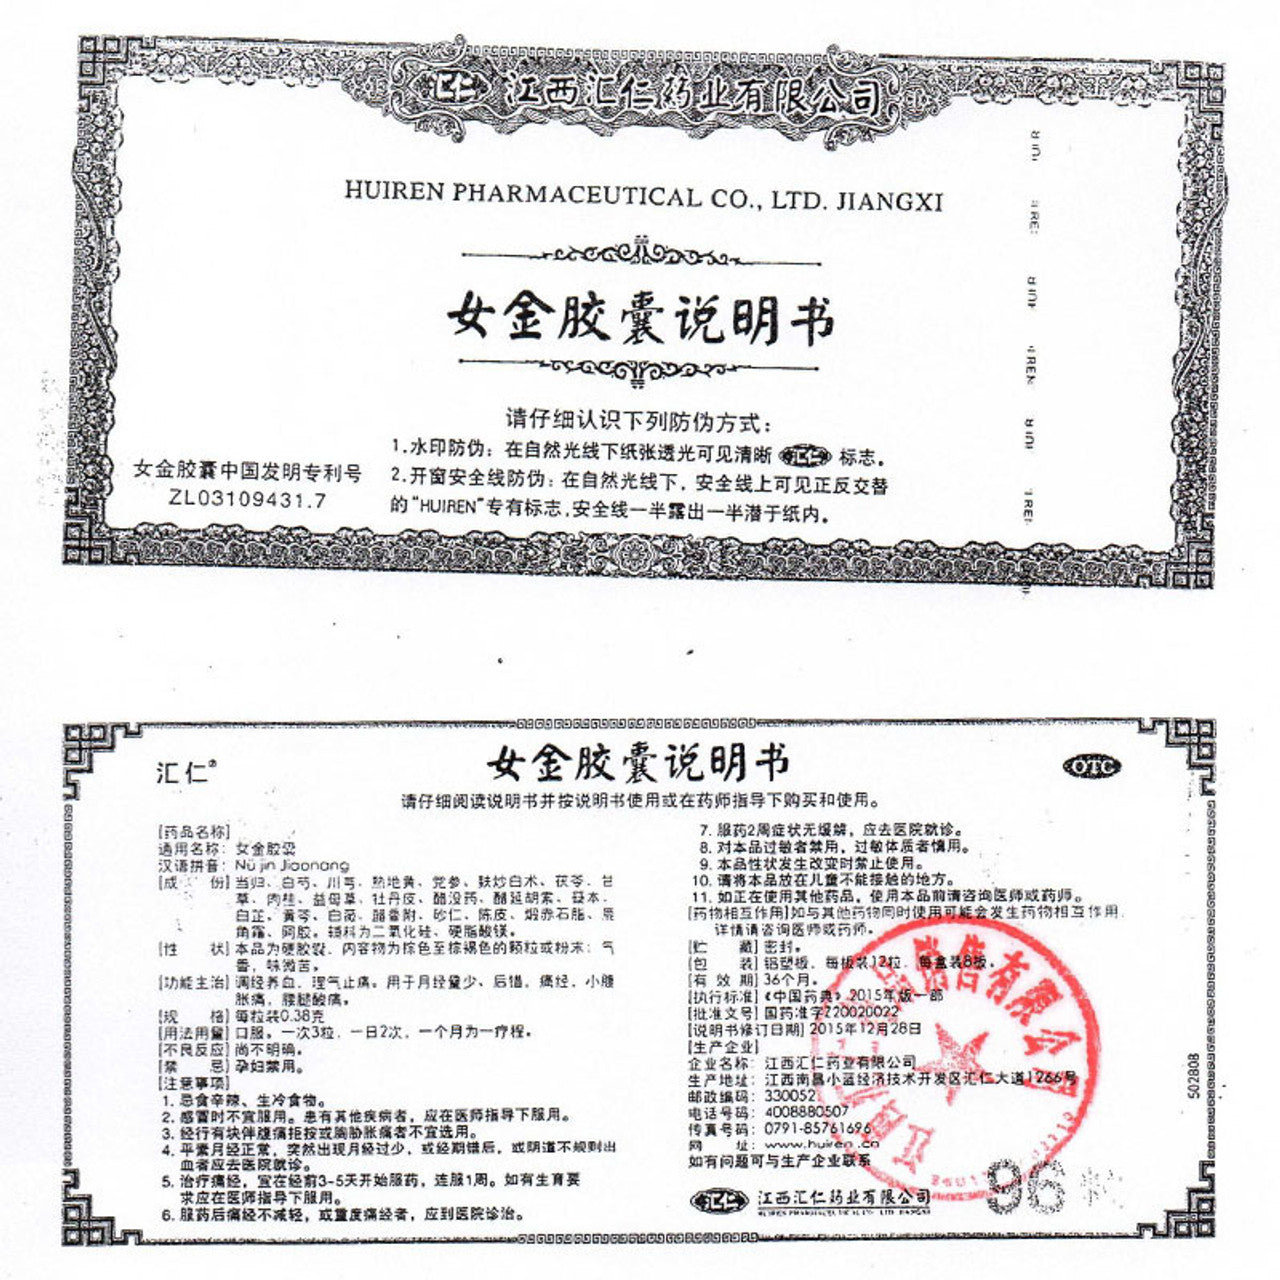 China Herb. Brand Huiren. Nujin jiaonang or Nujin Capsules or Nu Jin Jiao Nang or Nvjin Jiaonang or Nv Jin Jiao Nang or NvJinJiaoNang or NuJinJiaoNang for Regulate menstruation and nourish blood, regulate qi and relieve pain.